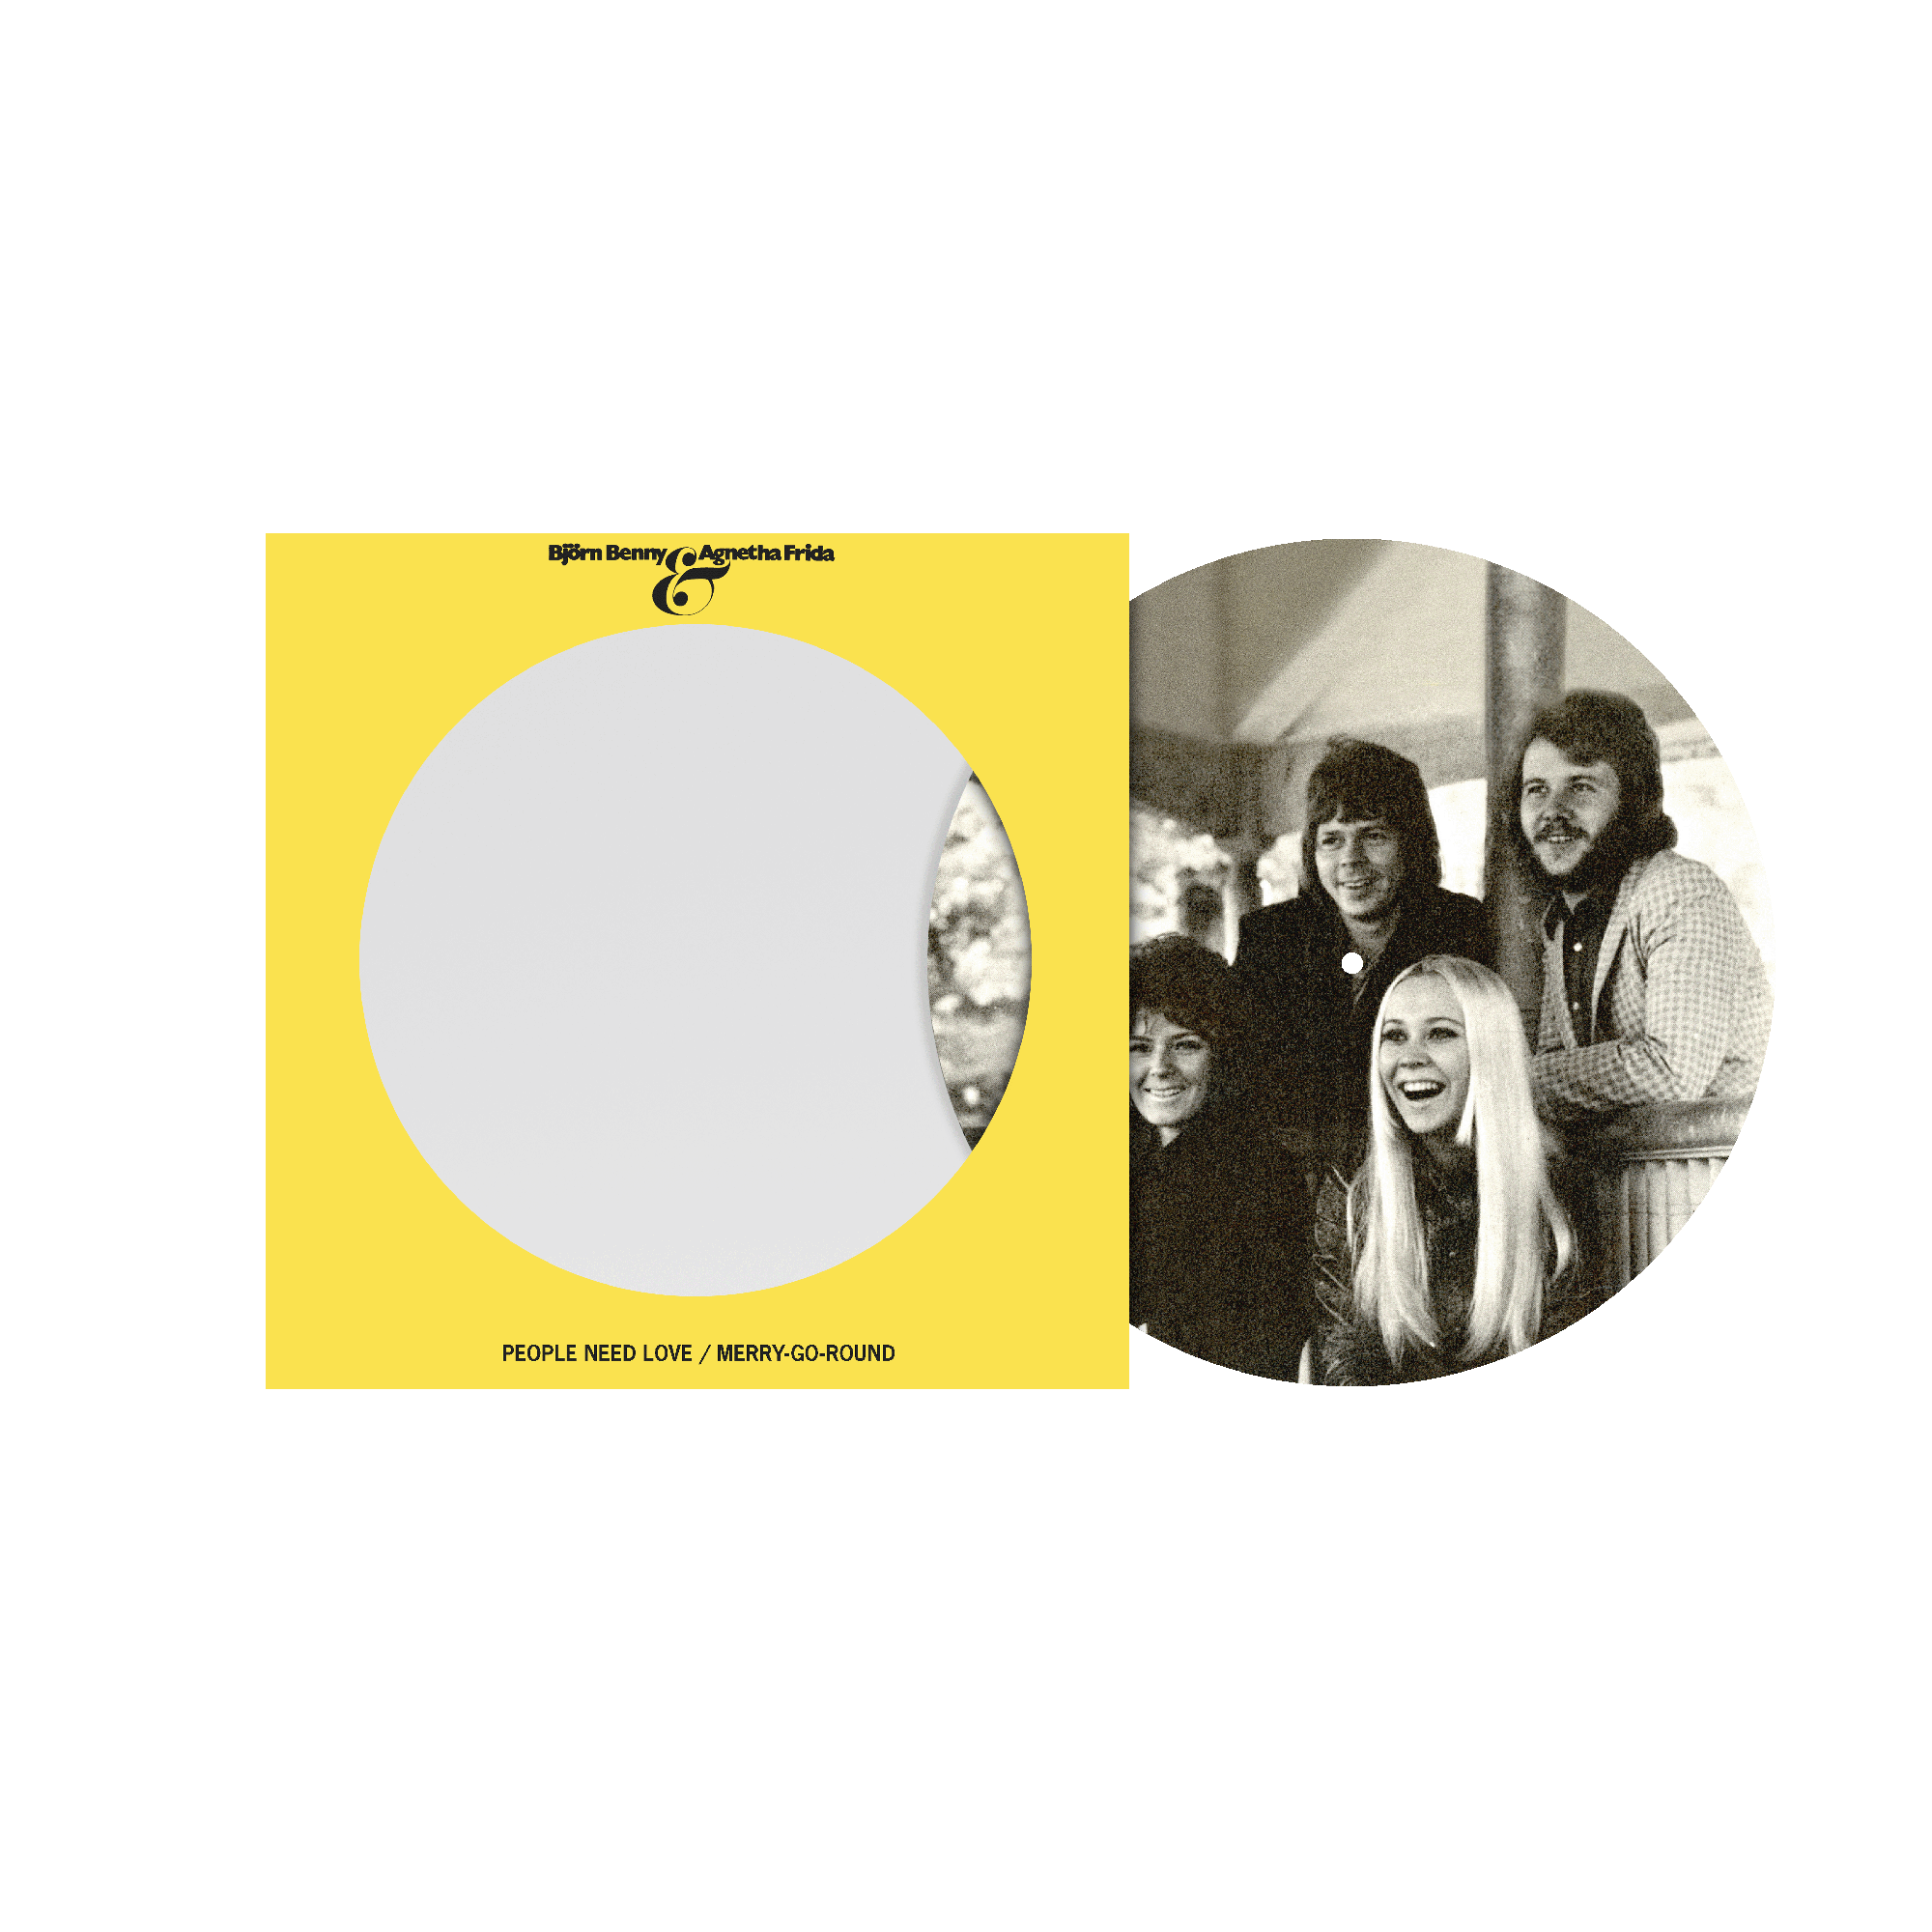 ABBA - People Need Love / Merry-Go-Round (Picture Disc 7")